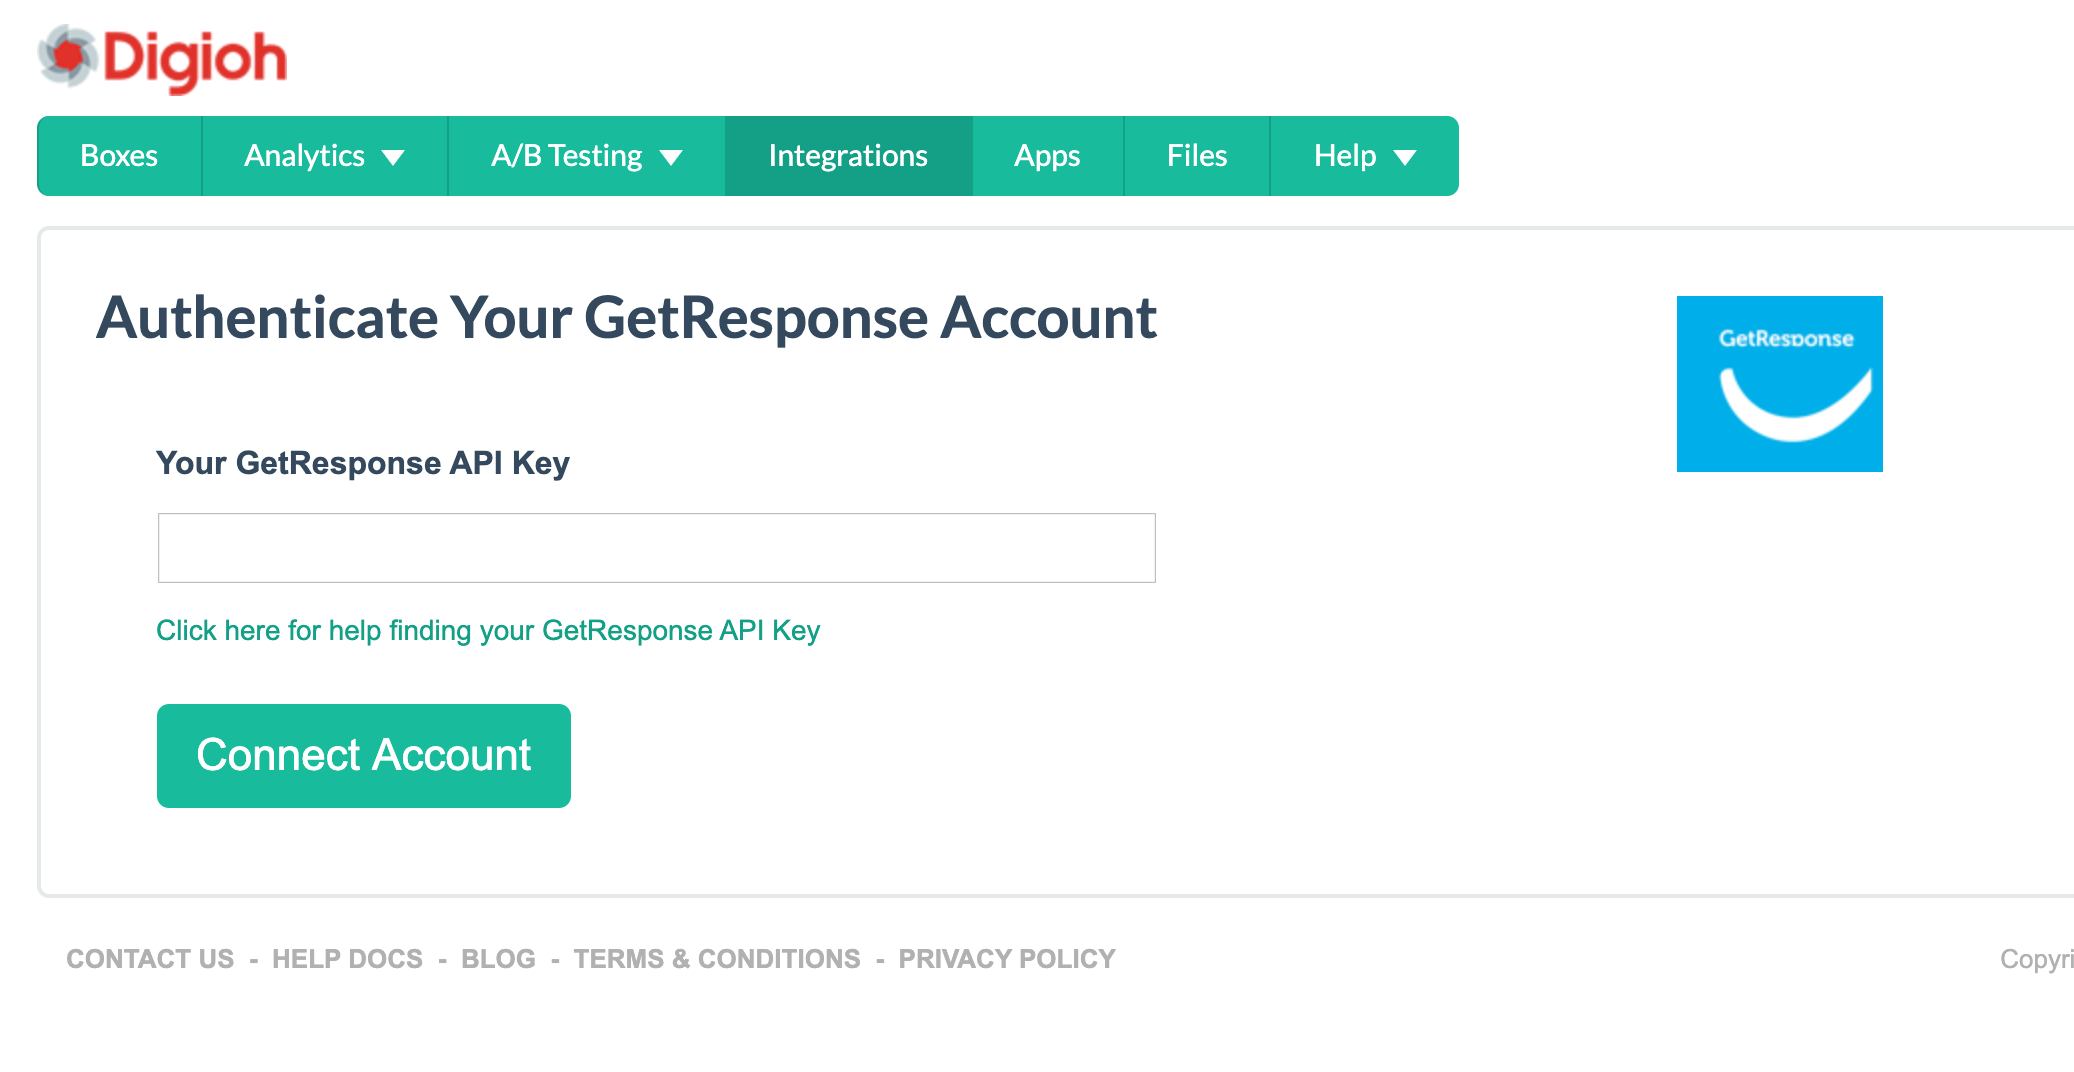 connect your getresponse account to digioh